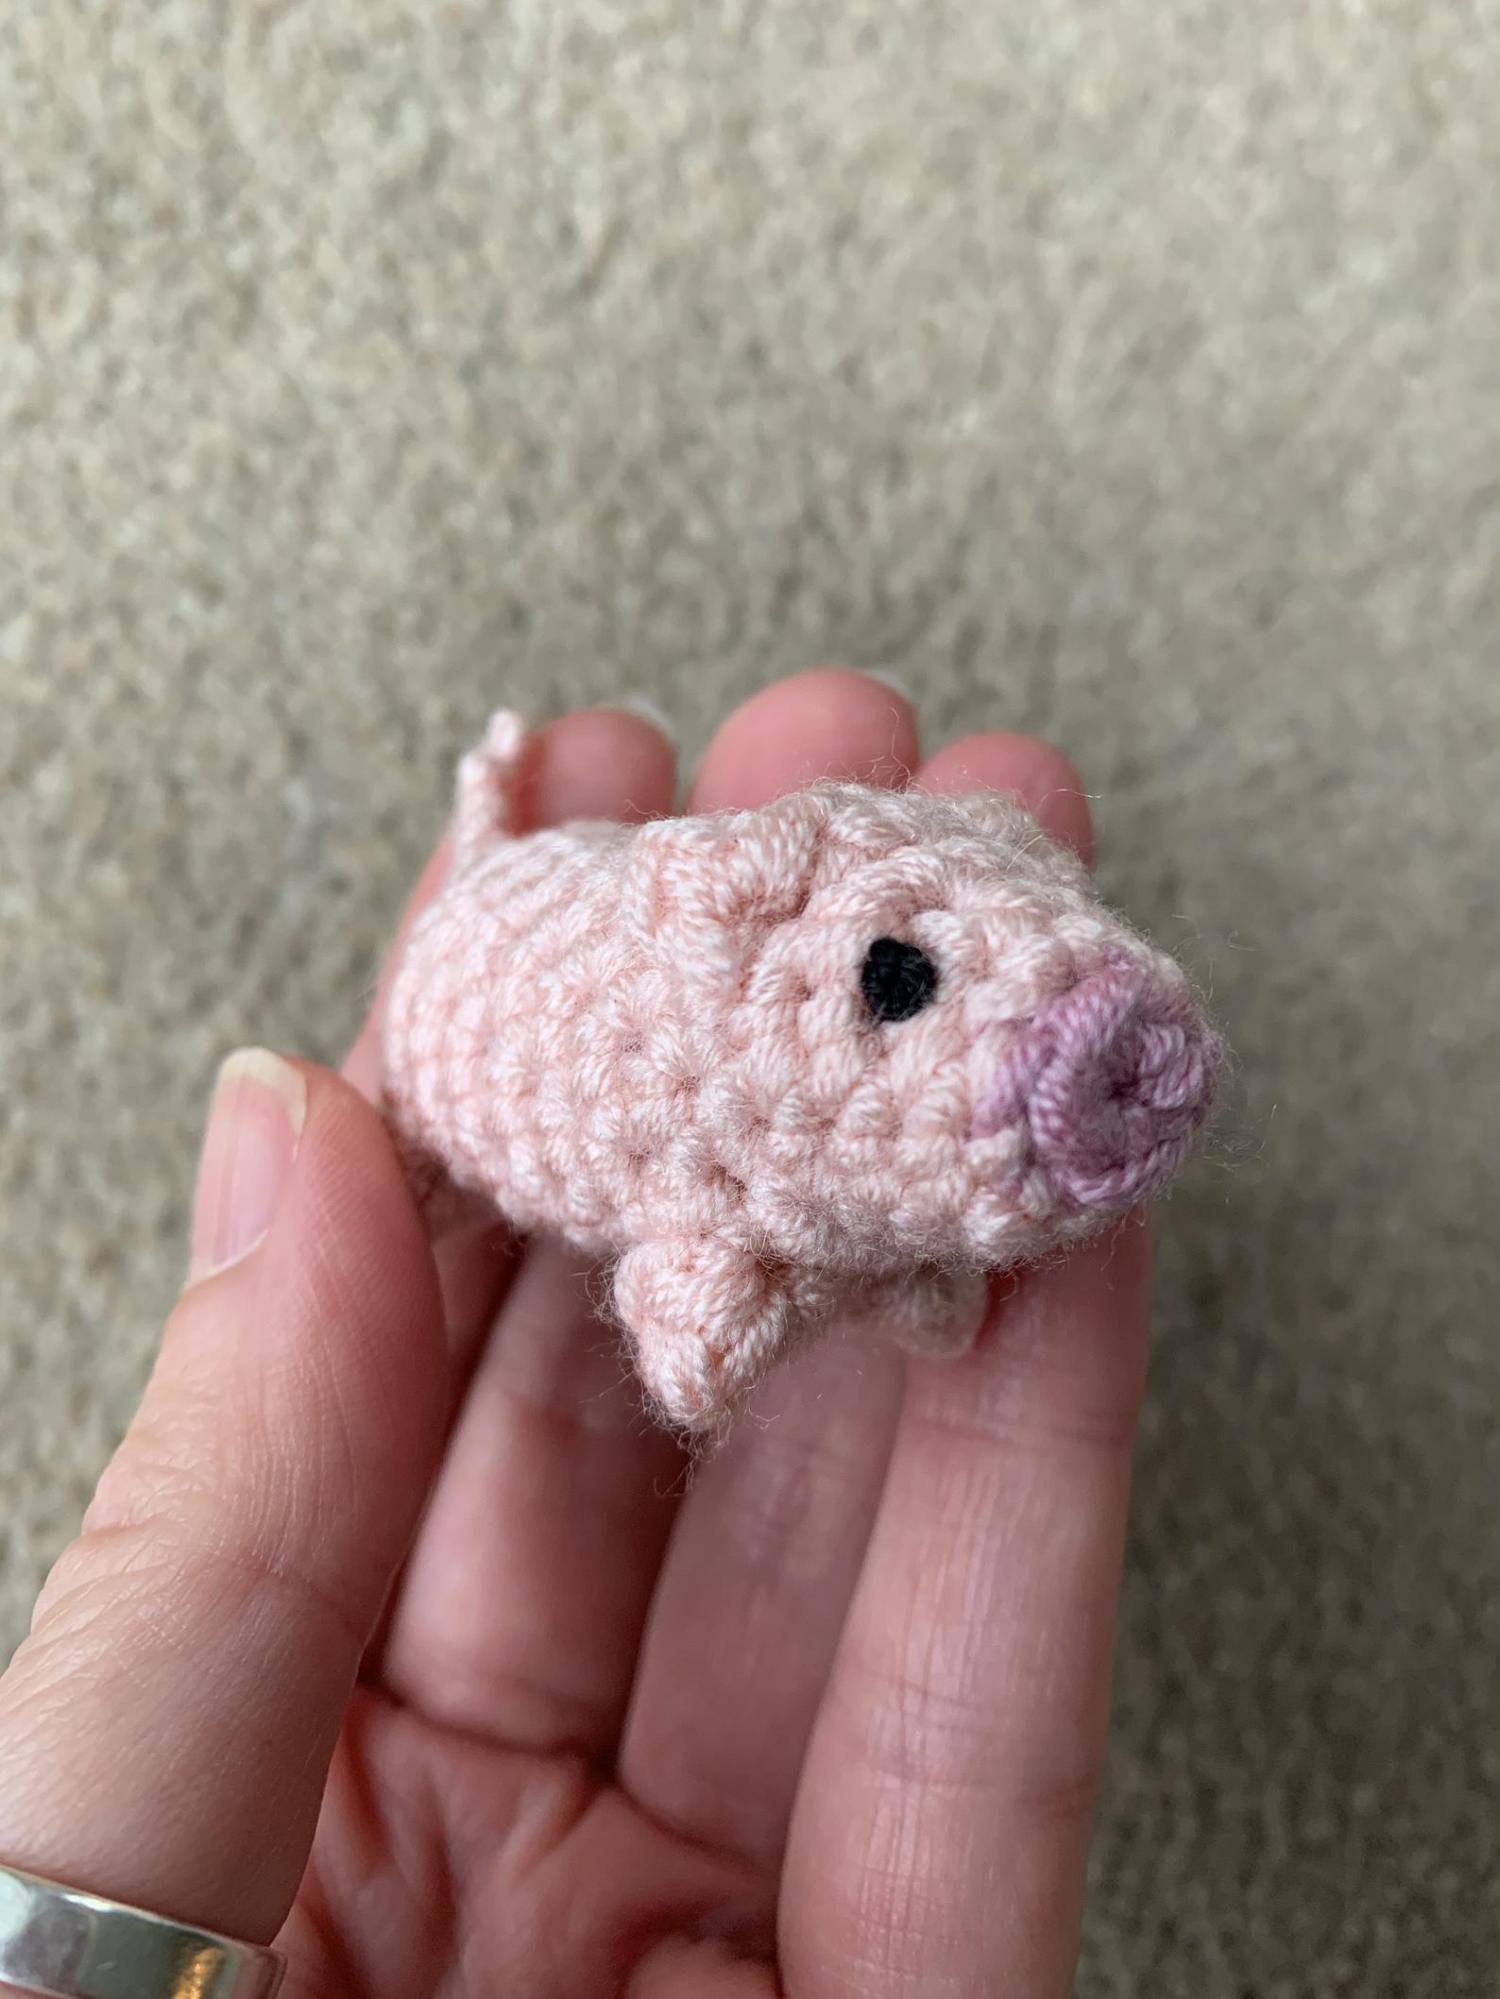 Birthing Pig That Feeds Its Piglets - Pig with Piglets Crochet Pattern